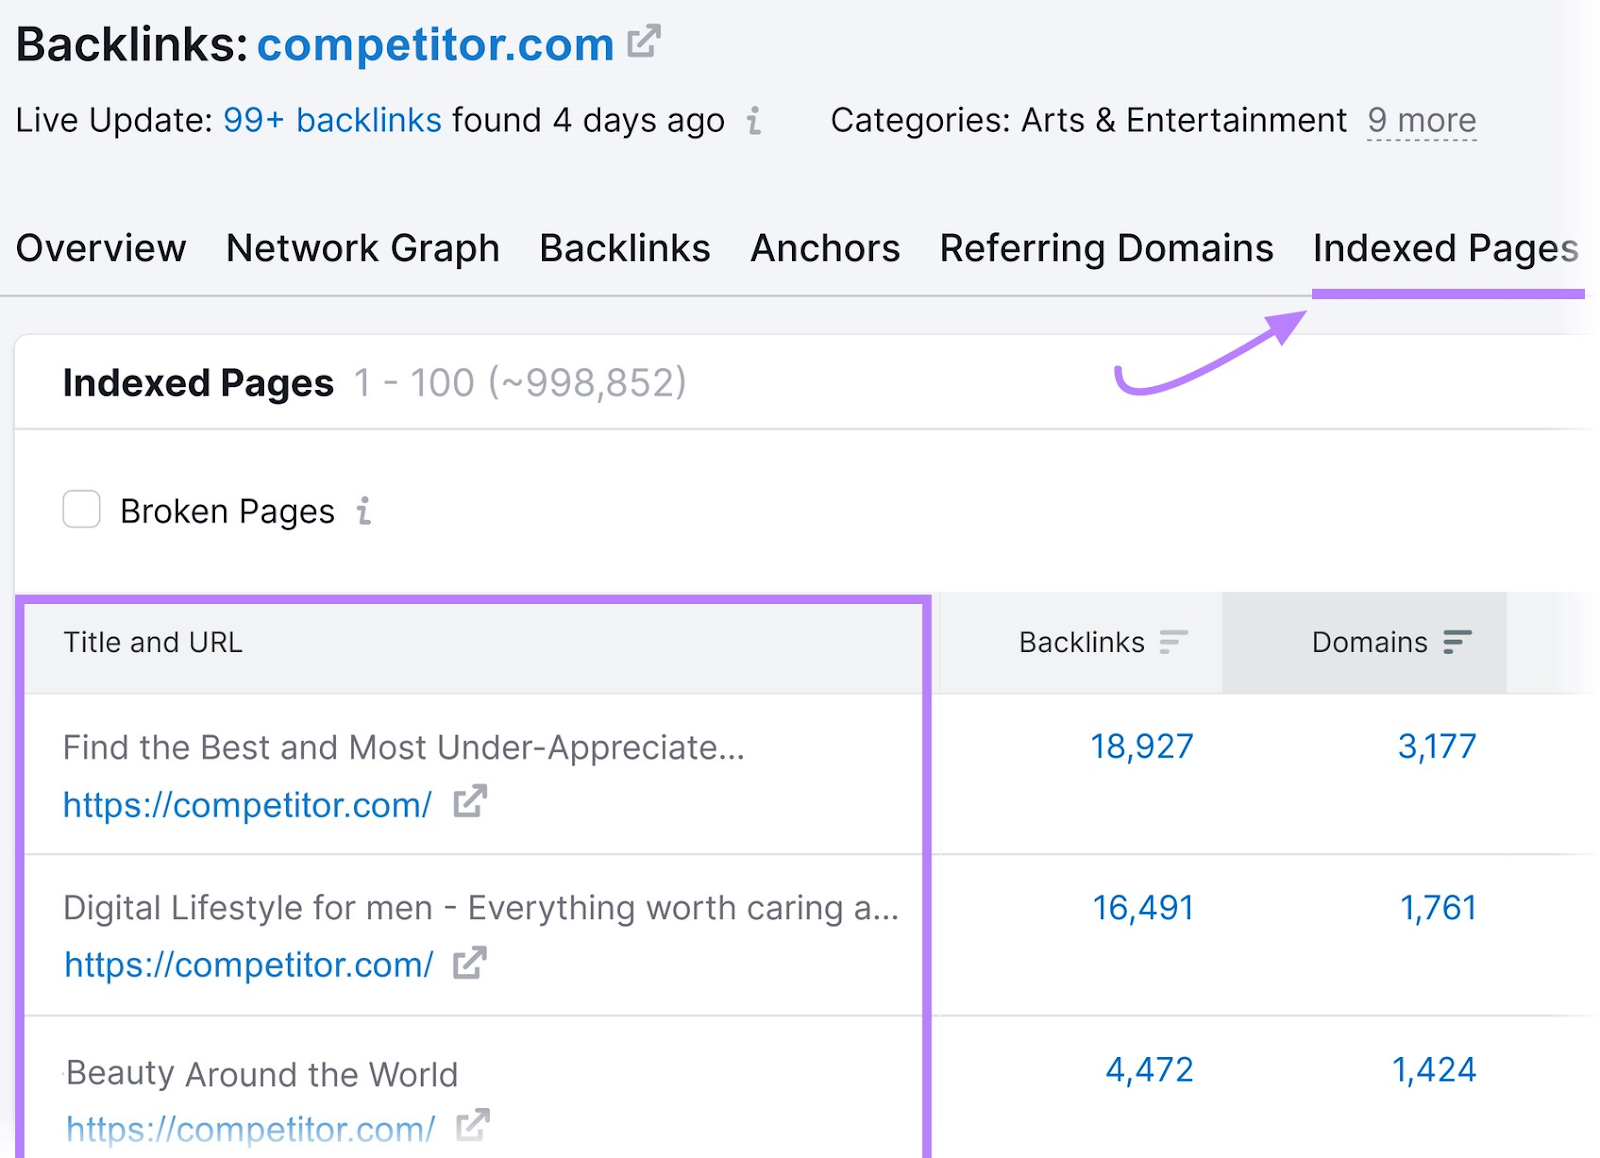 “Indexed Pages” tab in Backlink Analytics